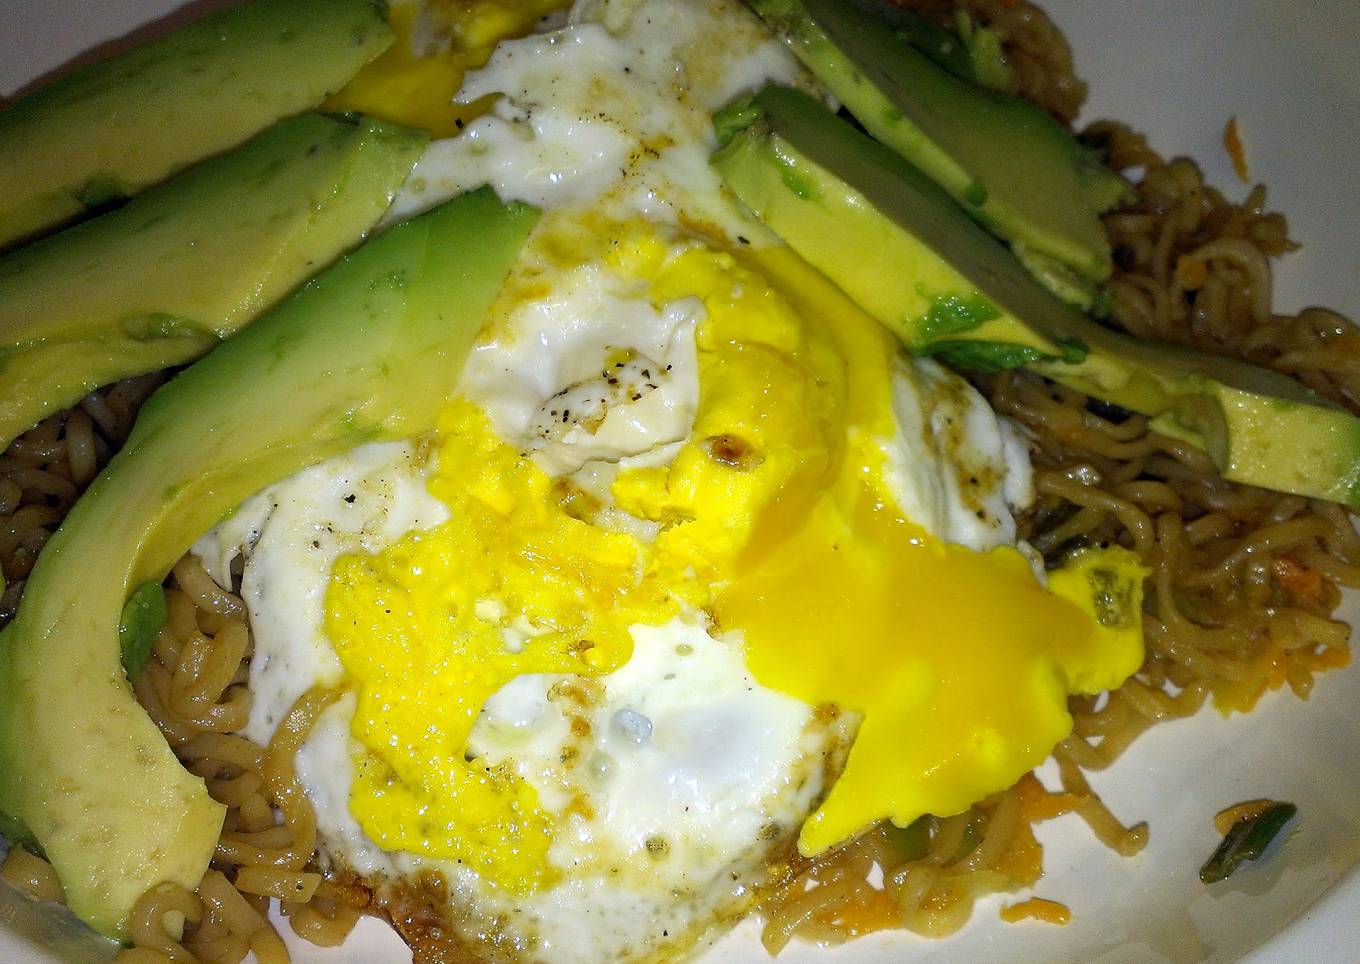 Top with egg noodles with useful filling